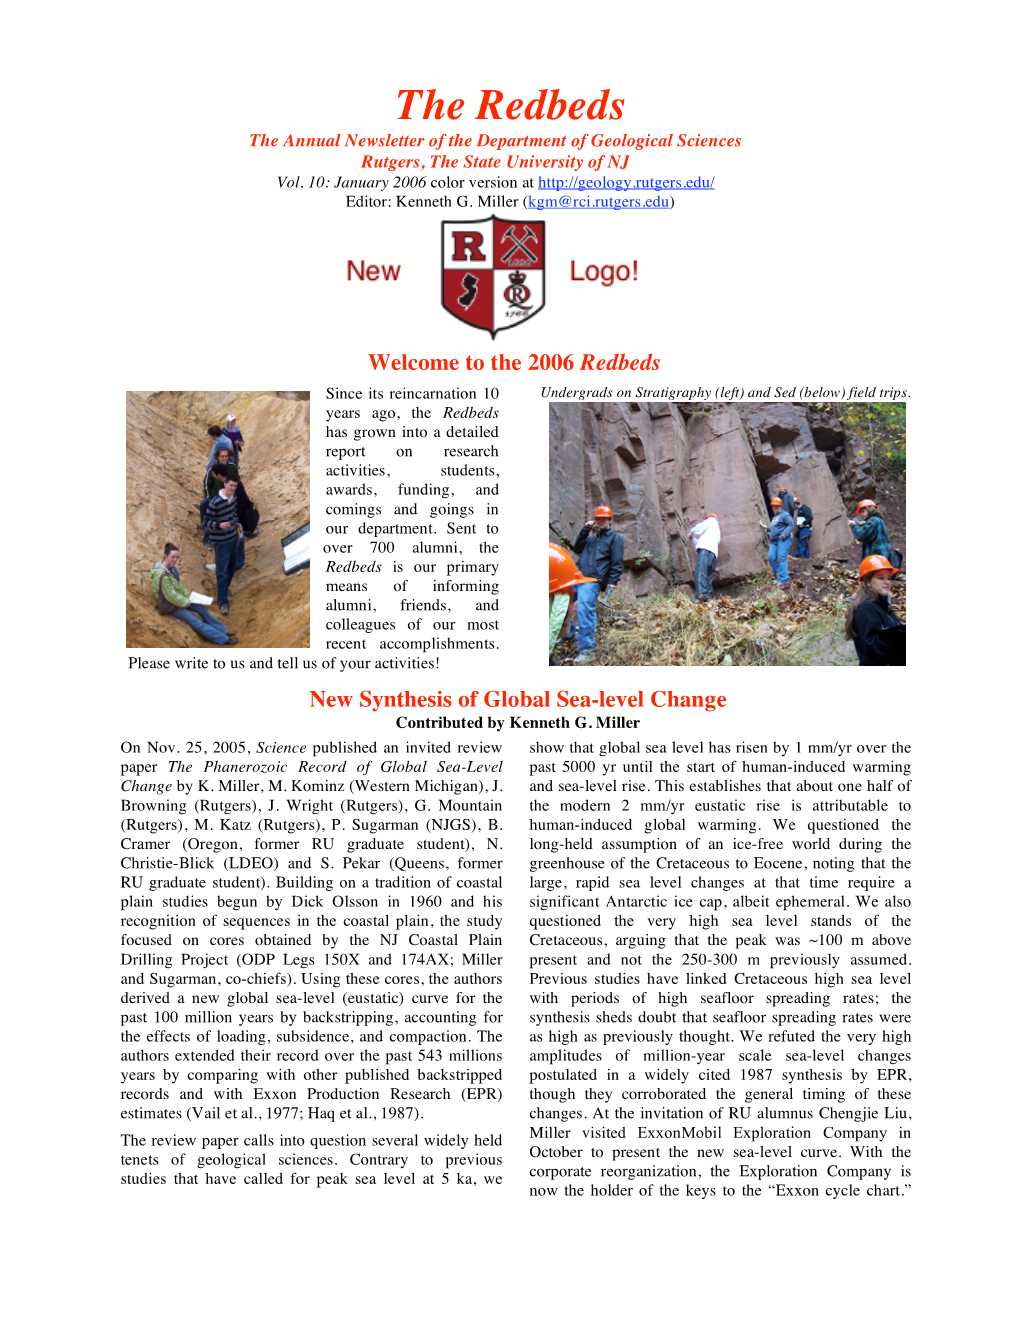 The Redbeds the Annual Newsletter of the Department of Geological Sciences Rutgers, the State University of NJ Vol